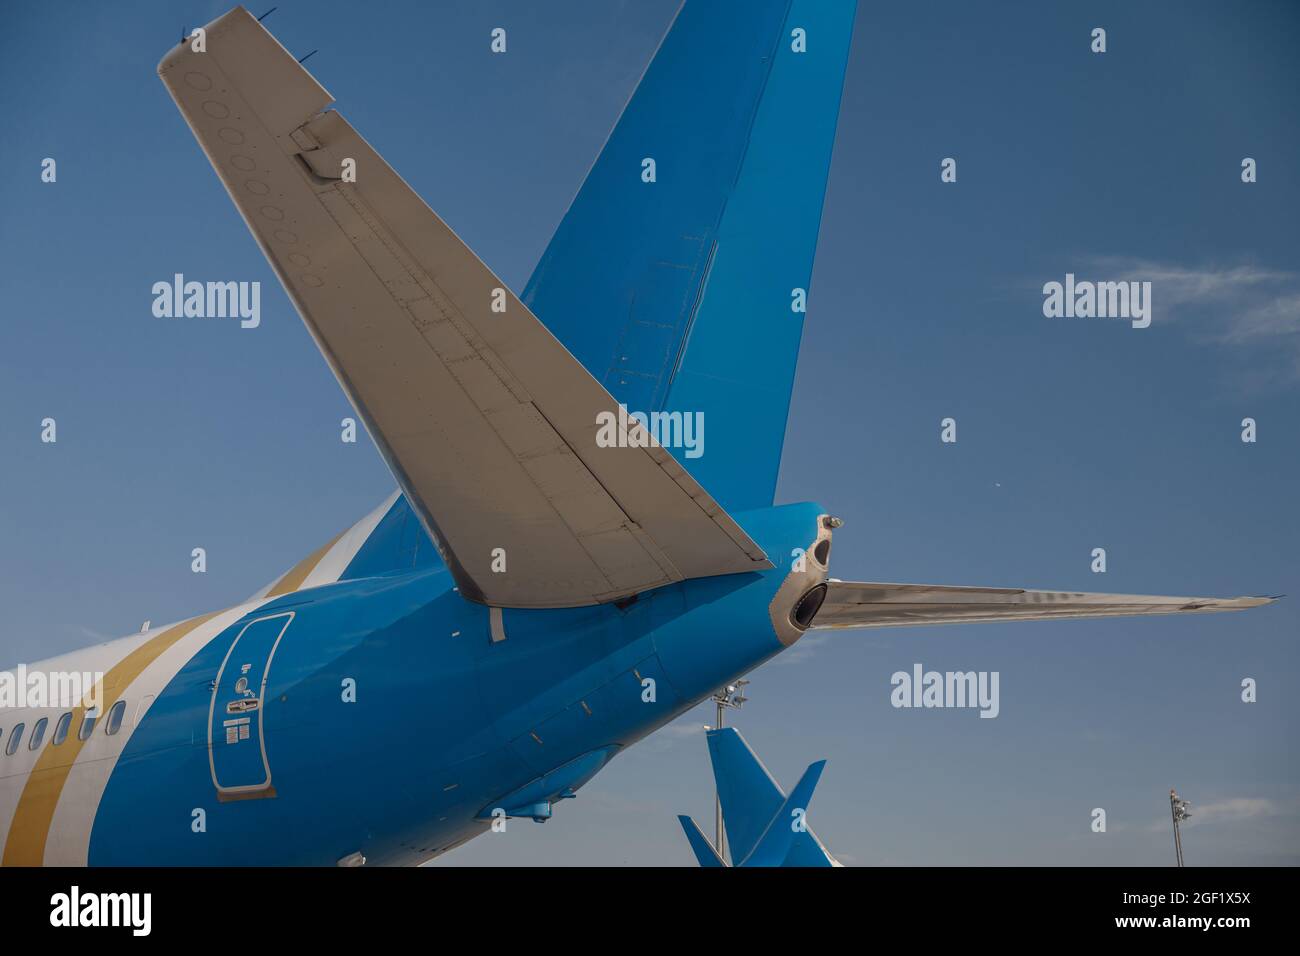 Tail of an aircraft in airport with blue sky in the background Stock Photo